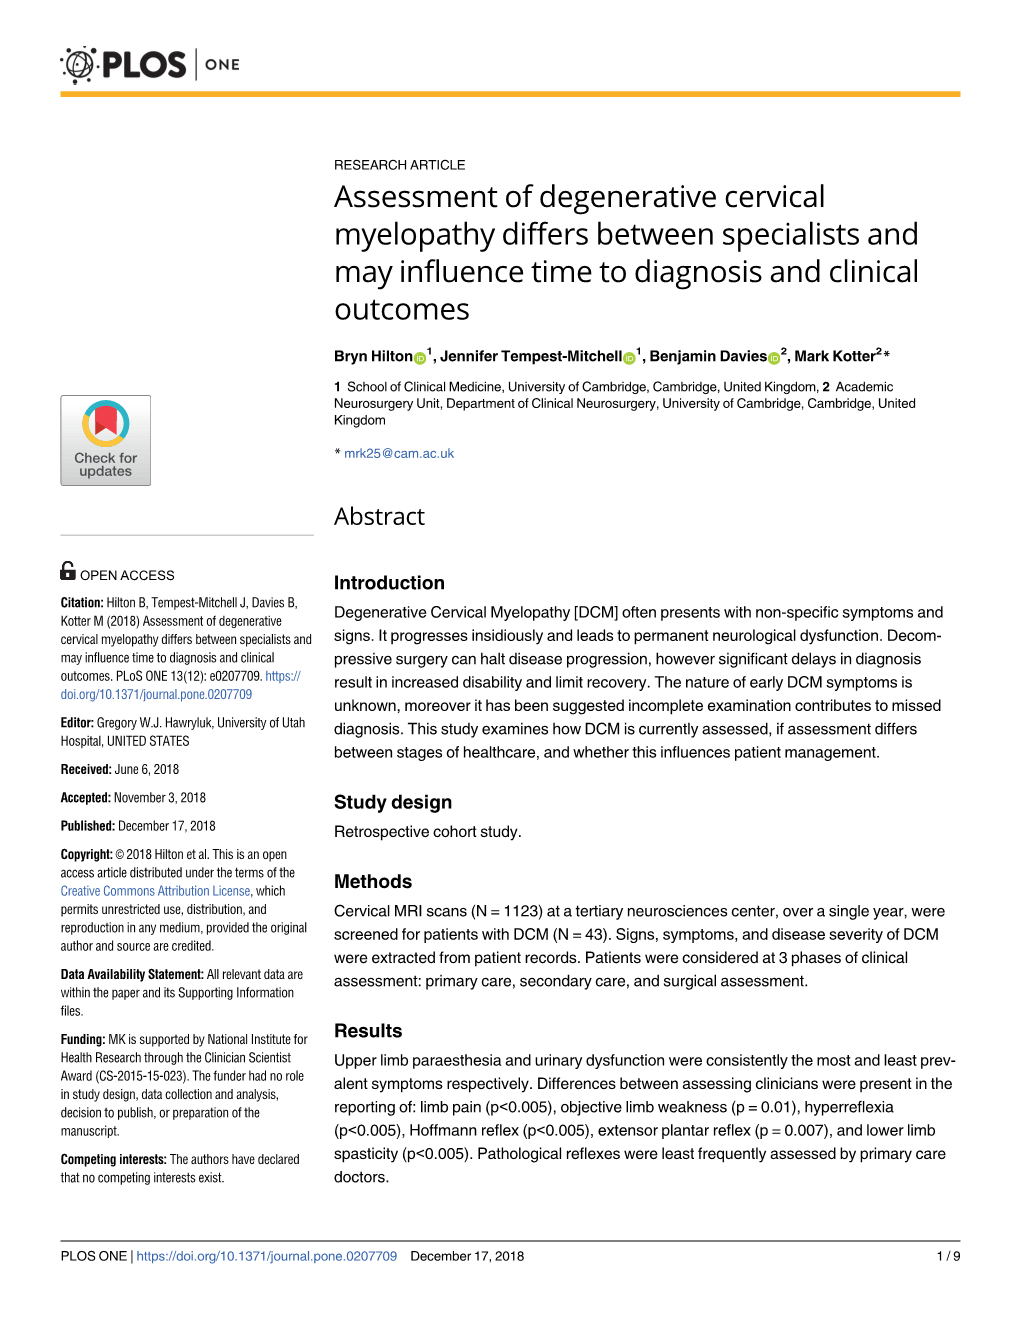 Assessment of Degenerative Cervical Myelopathy Differs Between Specialists and May Influence Time to Diagnosis and Clinical Outcomes